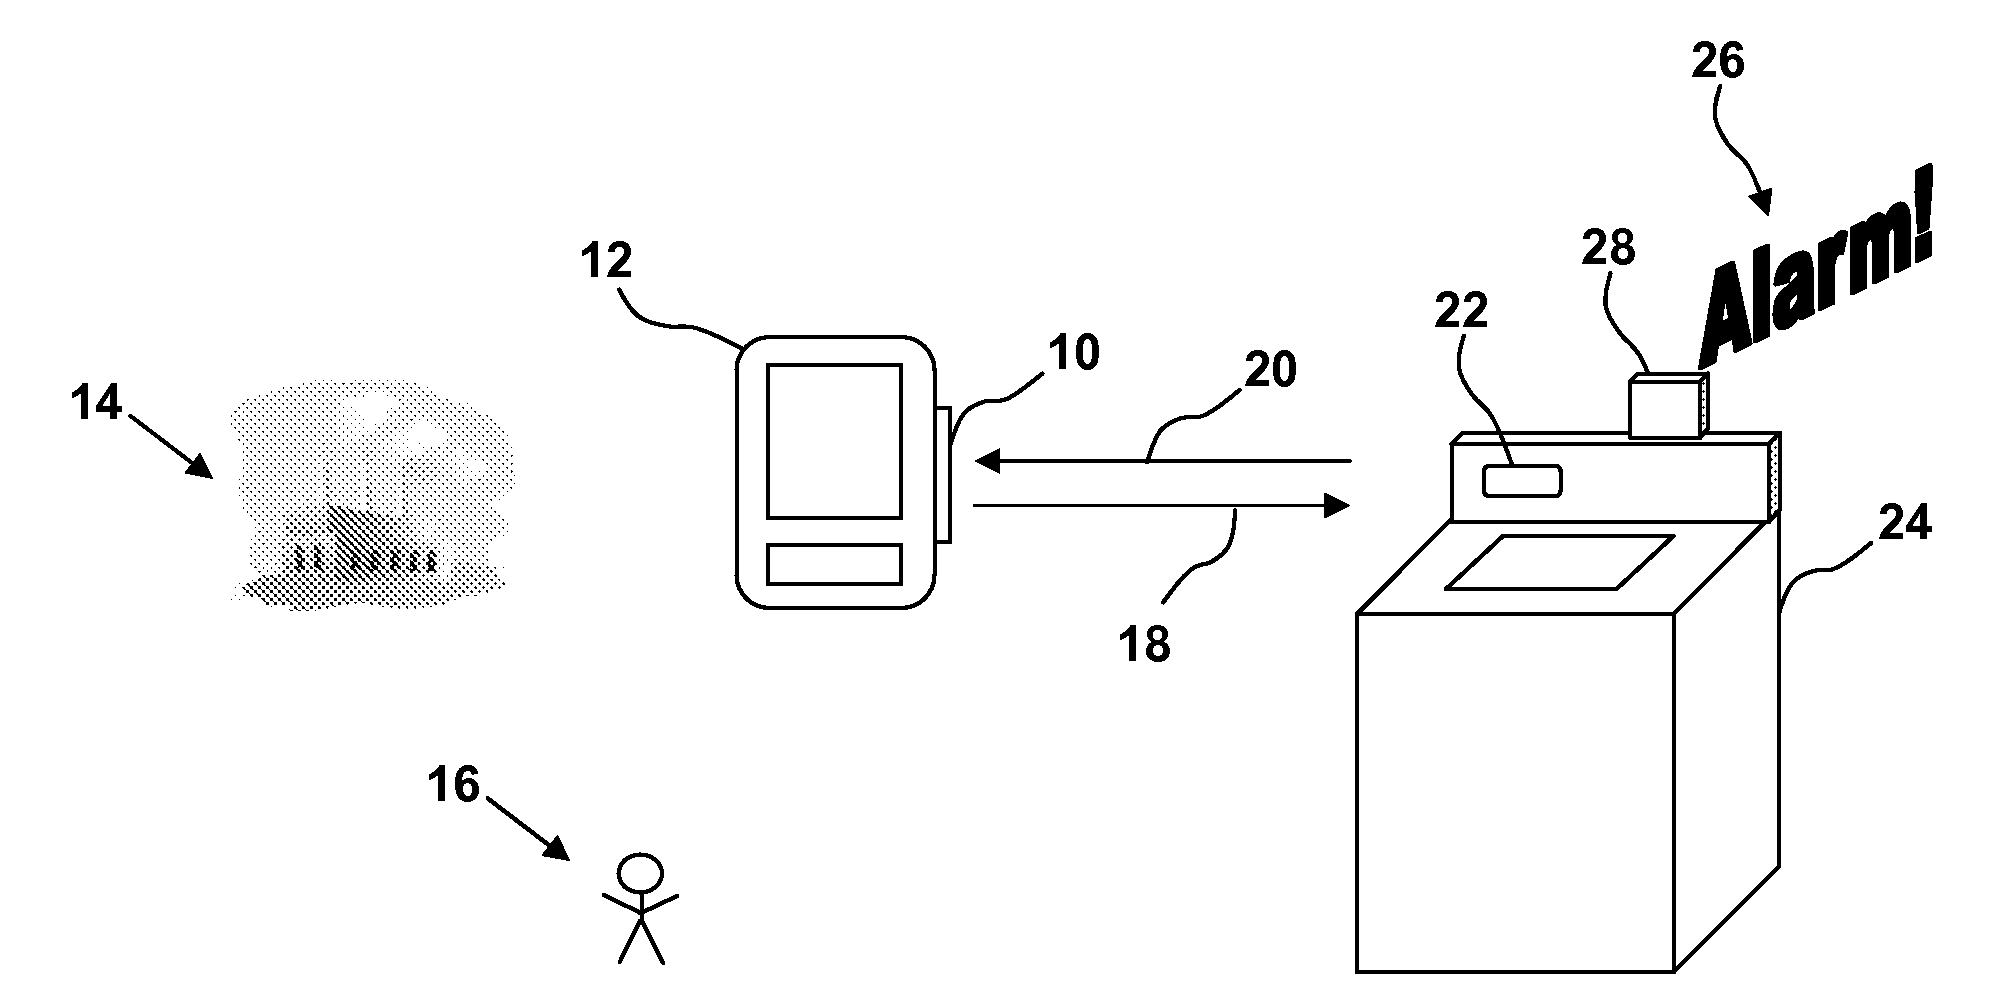 Method and apparatus for preventing water damage to articles